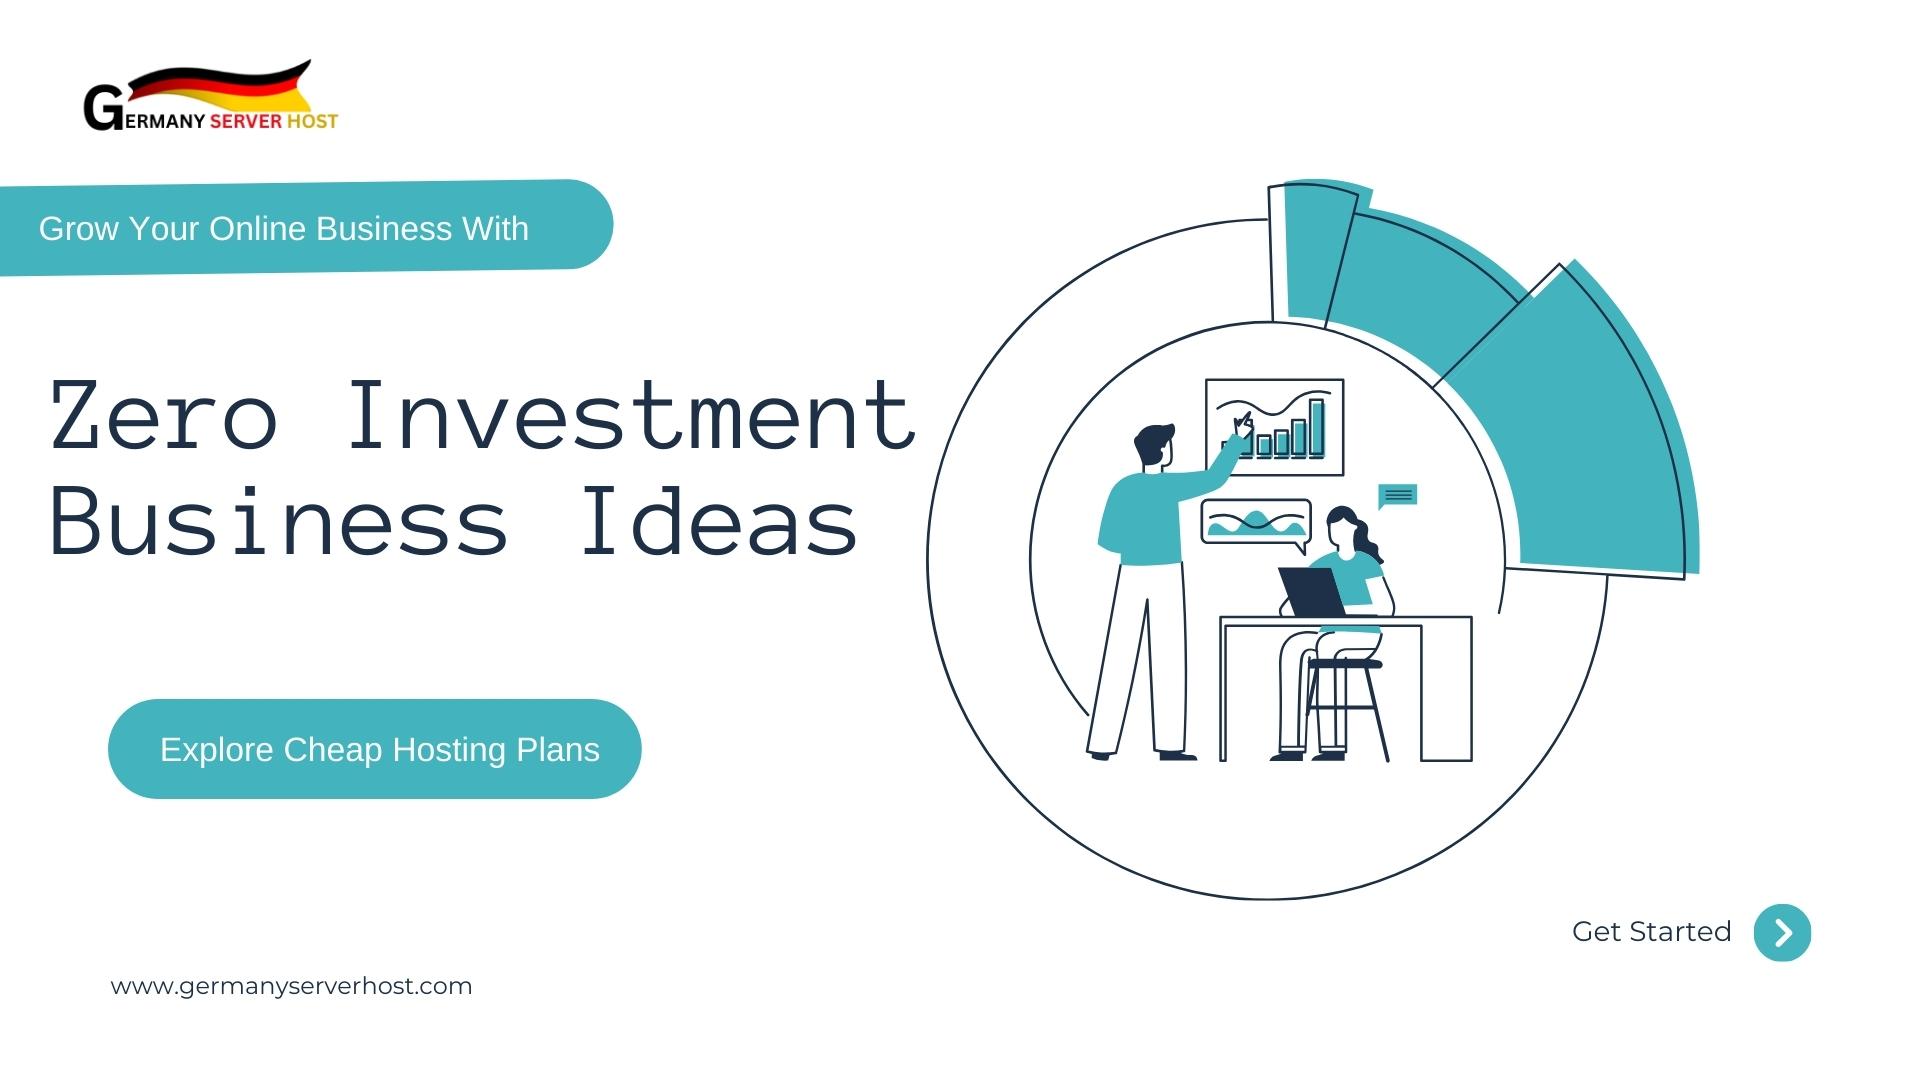 What are zero investment business ideas